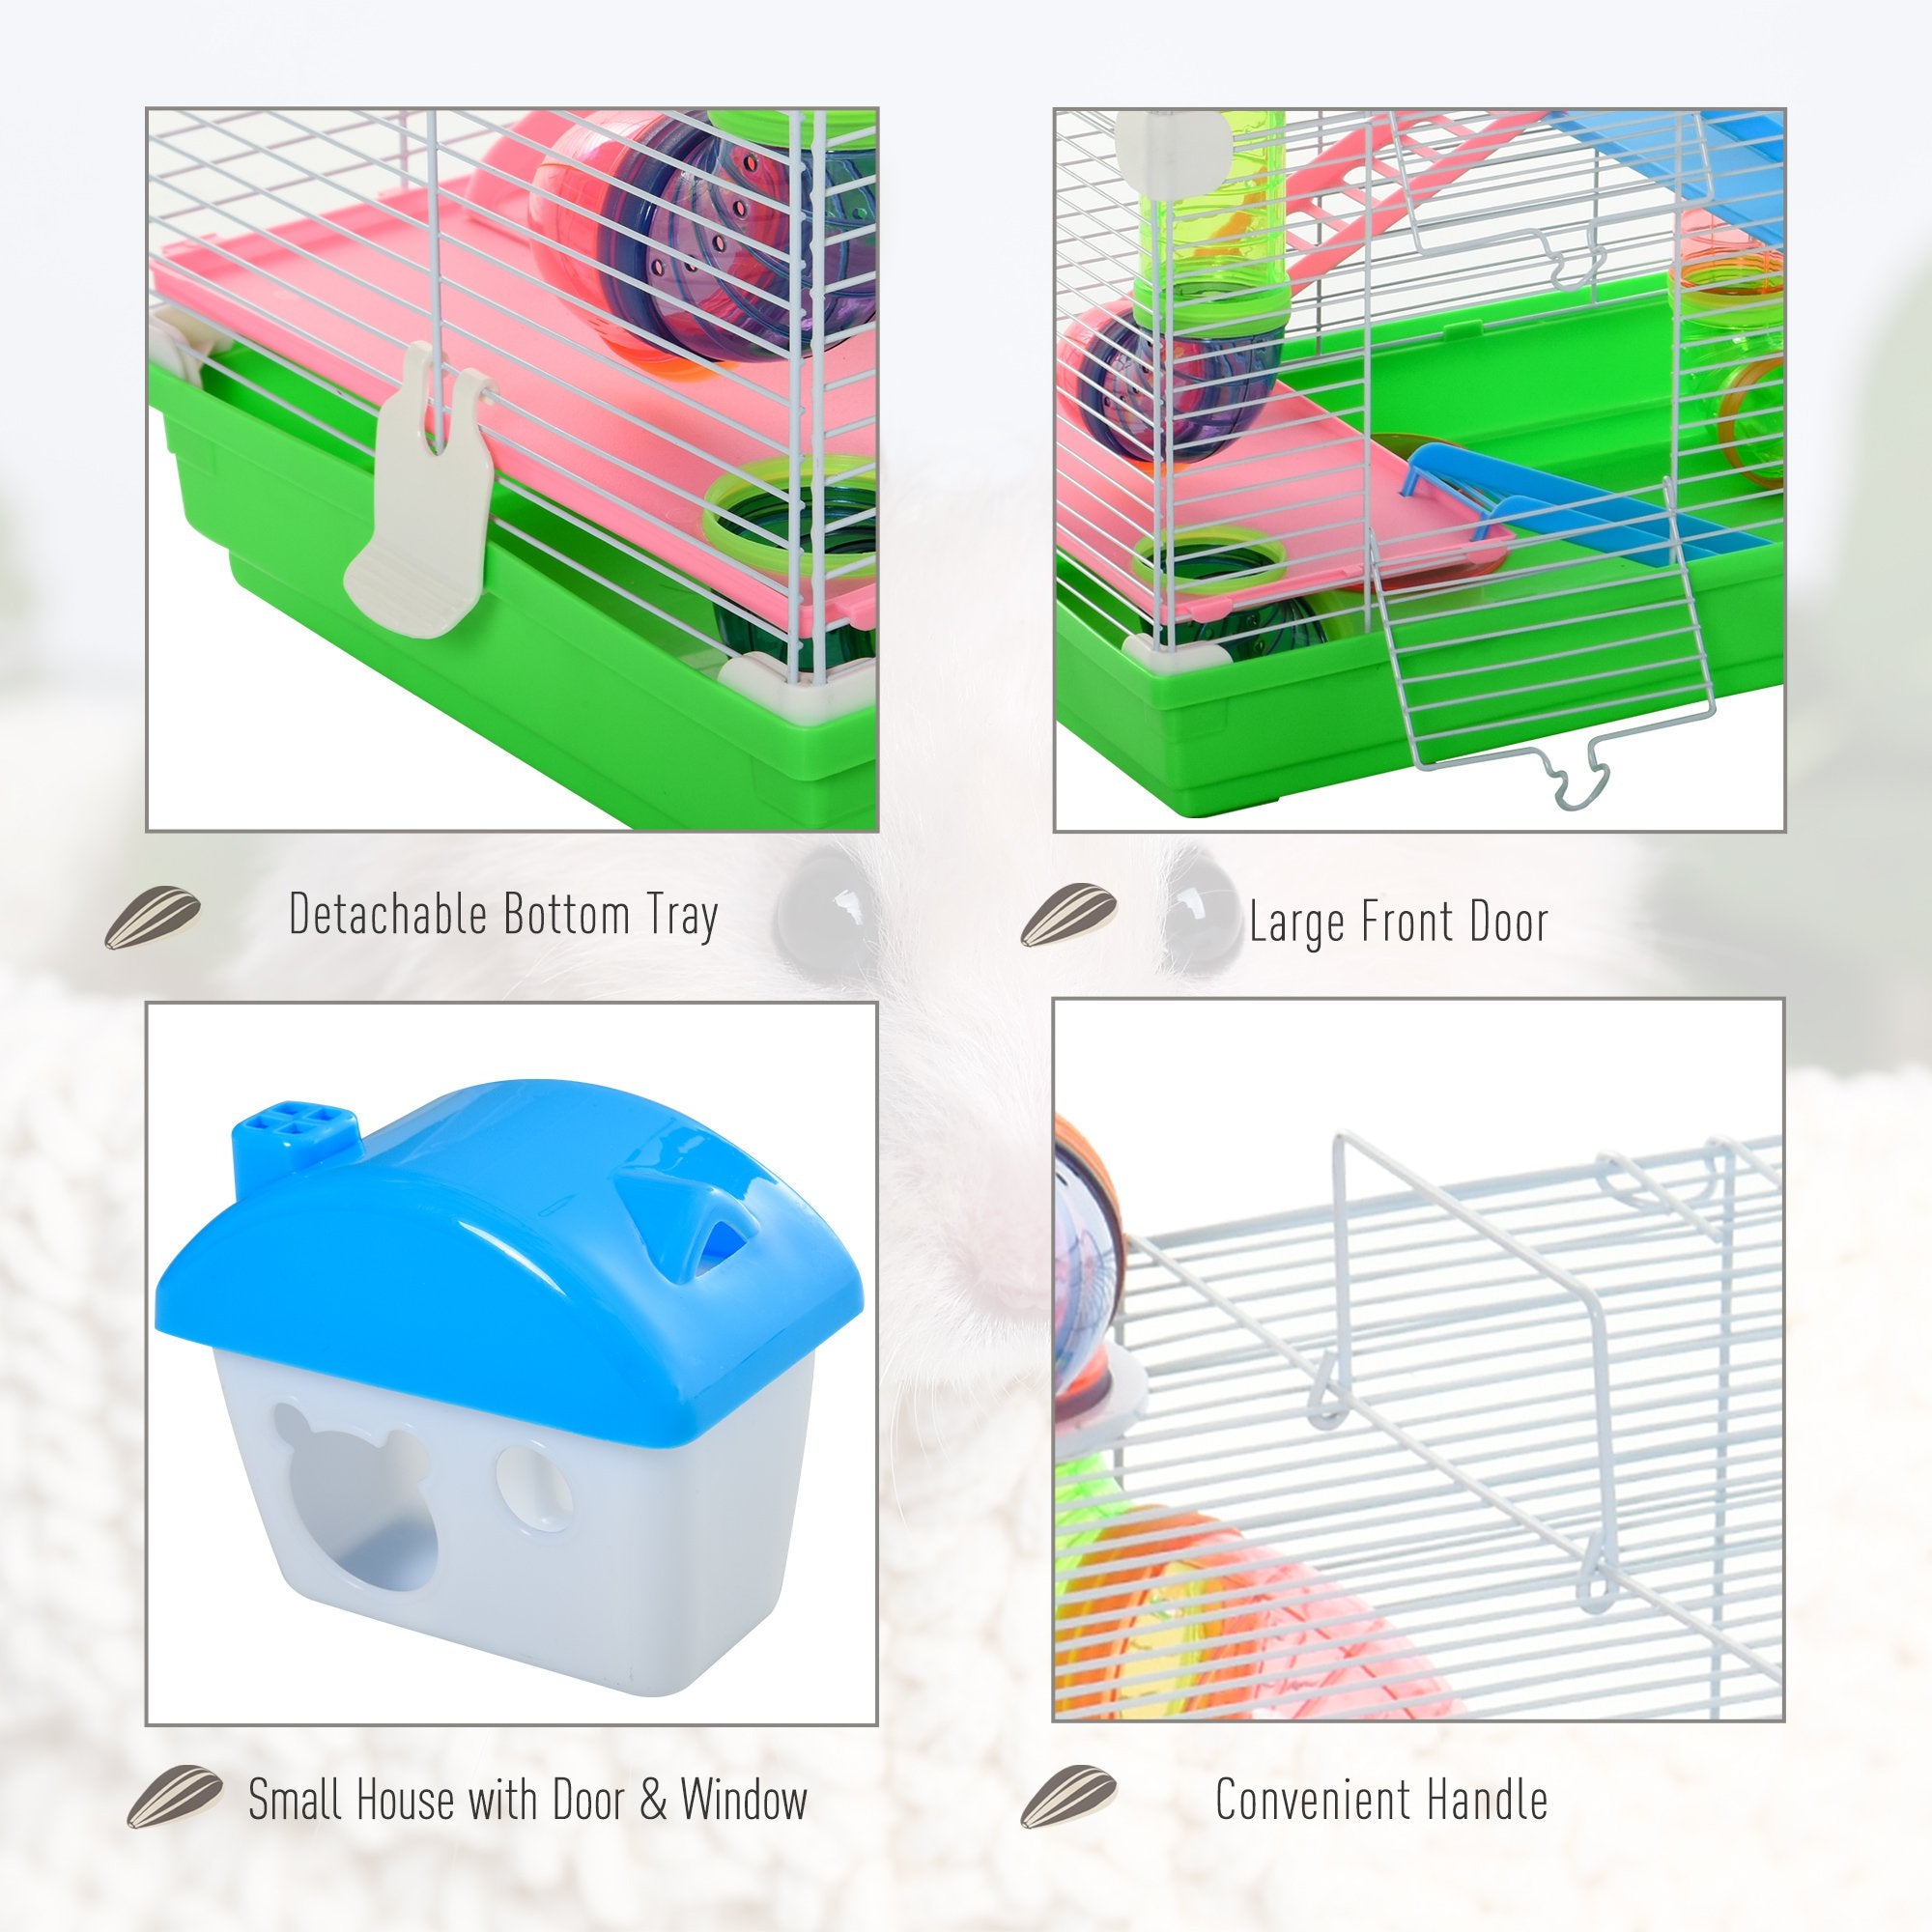 Pawhut 5 Tier Hamster Cage Carrier Habitat Small Animal House with Exercise Wheels Tunnel Tube Water Bottle Dishes House Ladder for Dwarf Mice, Green - Inspirely